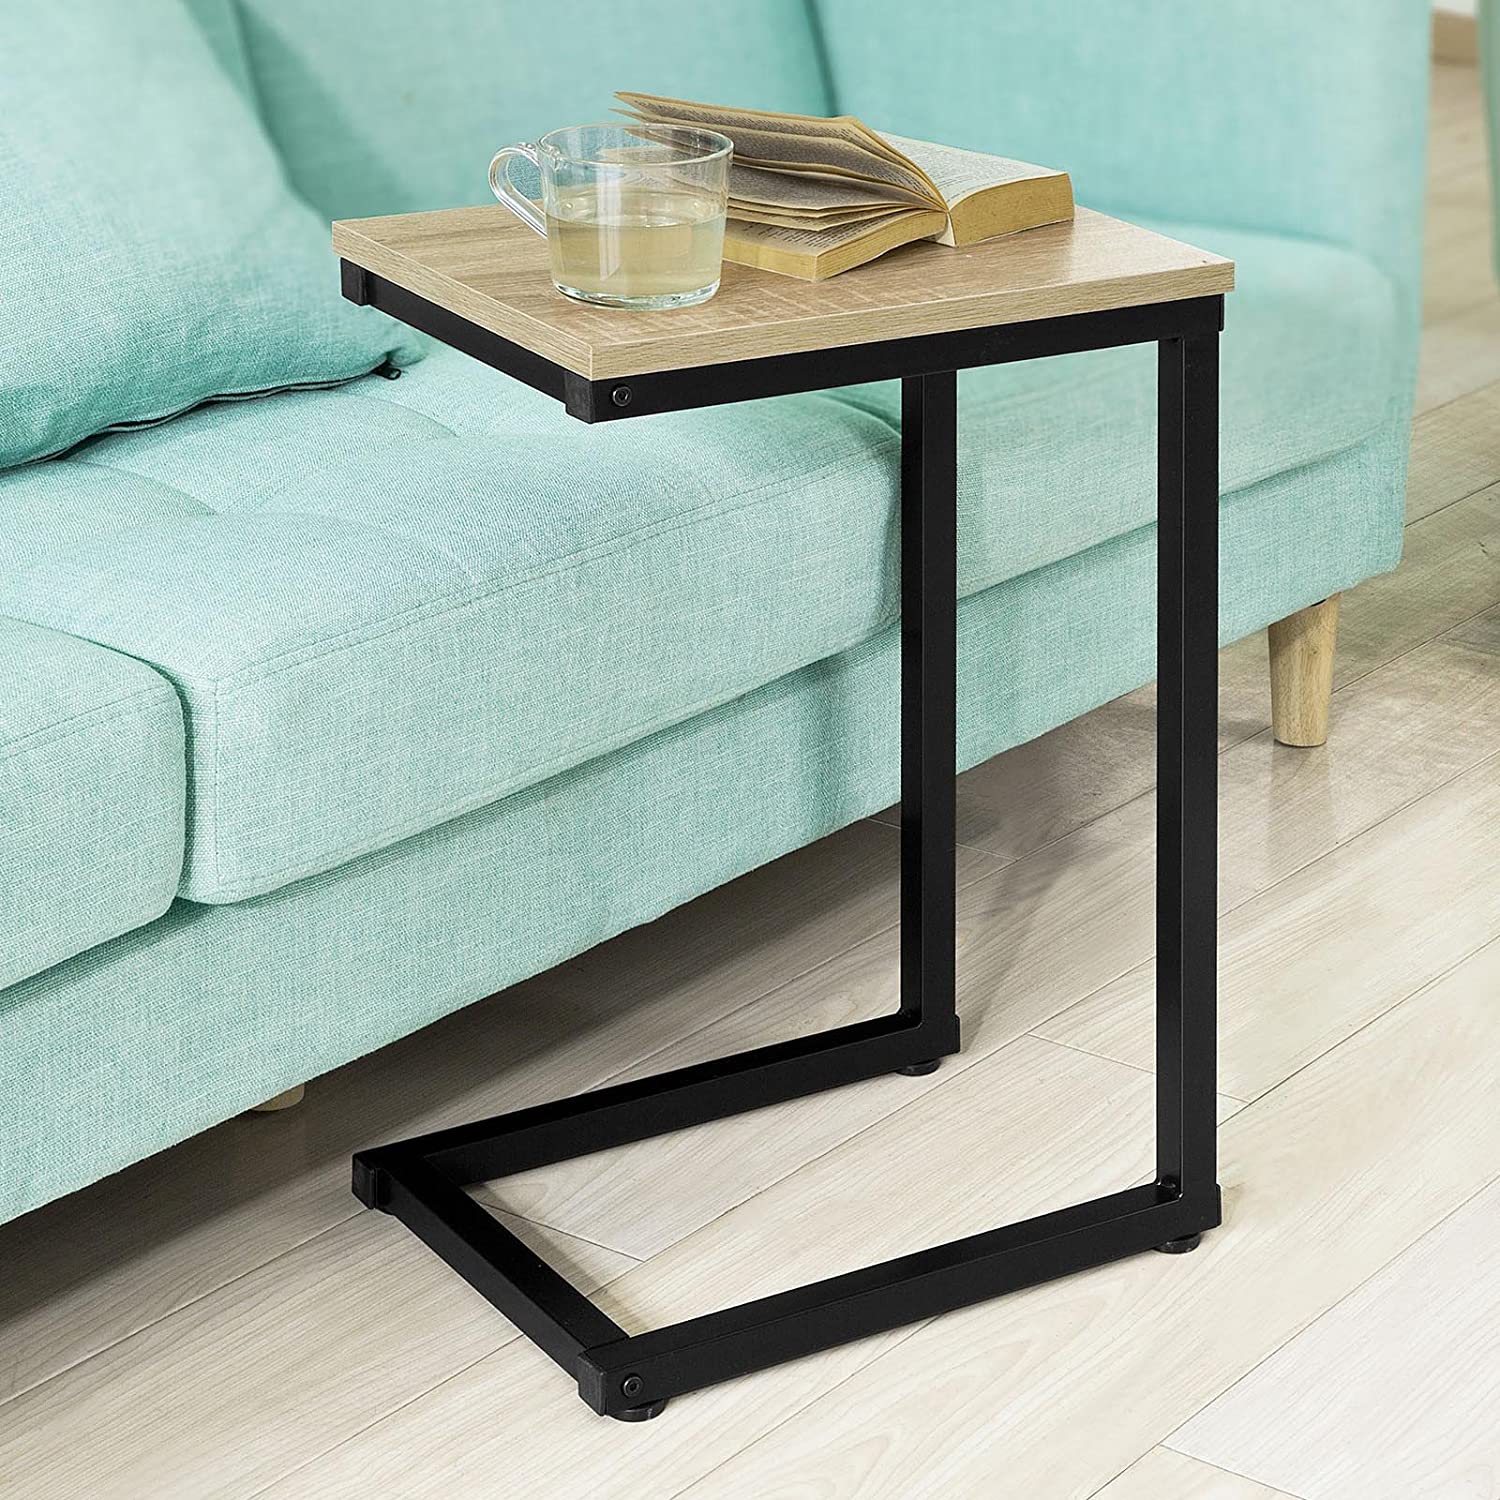 Sofa Side Table for Coffee time - image8